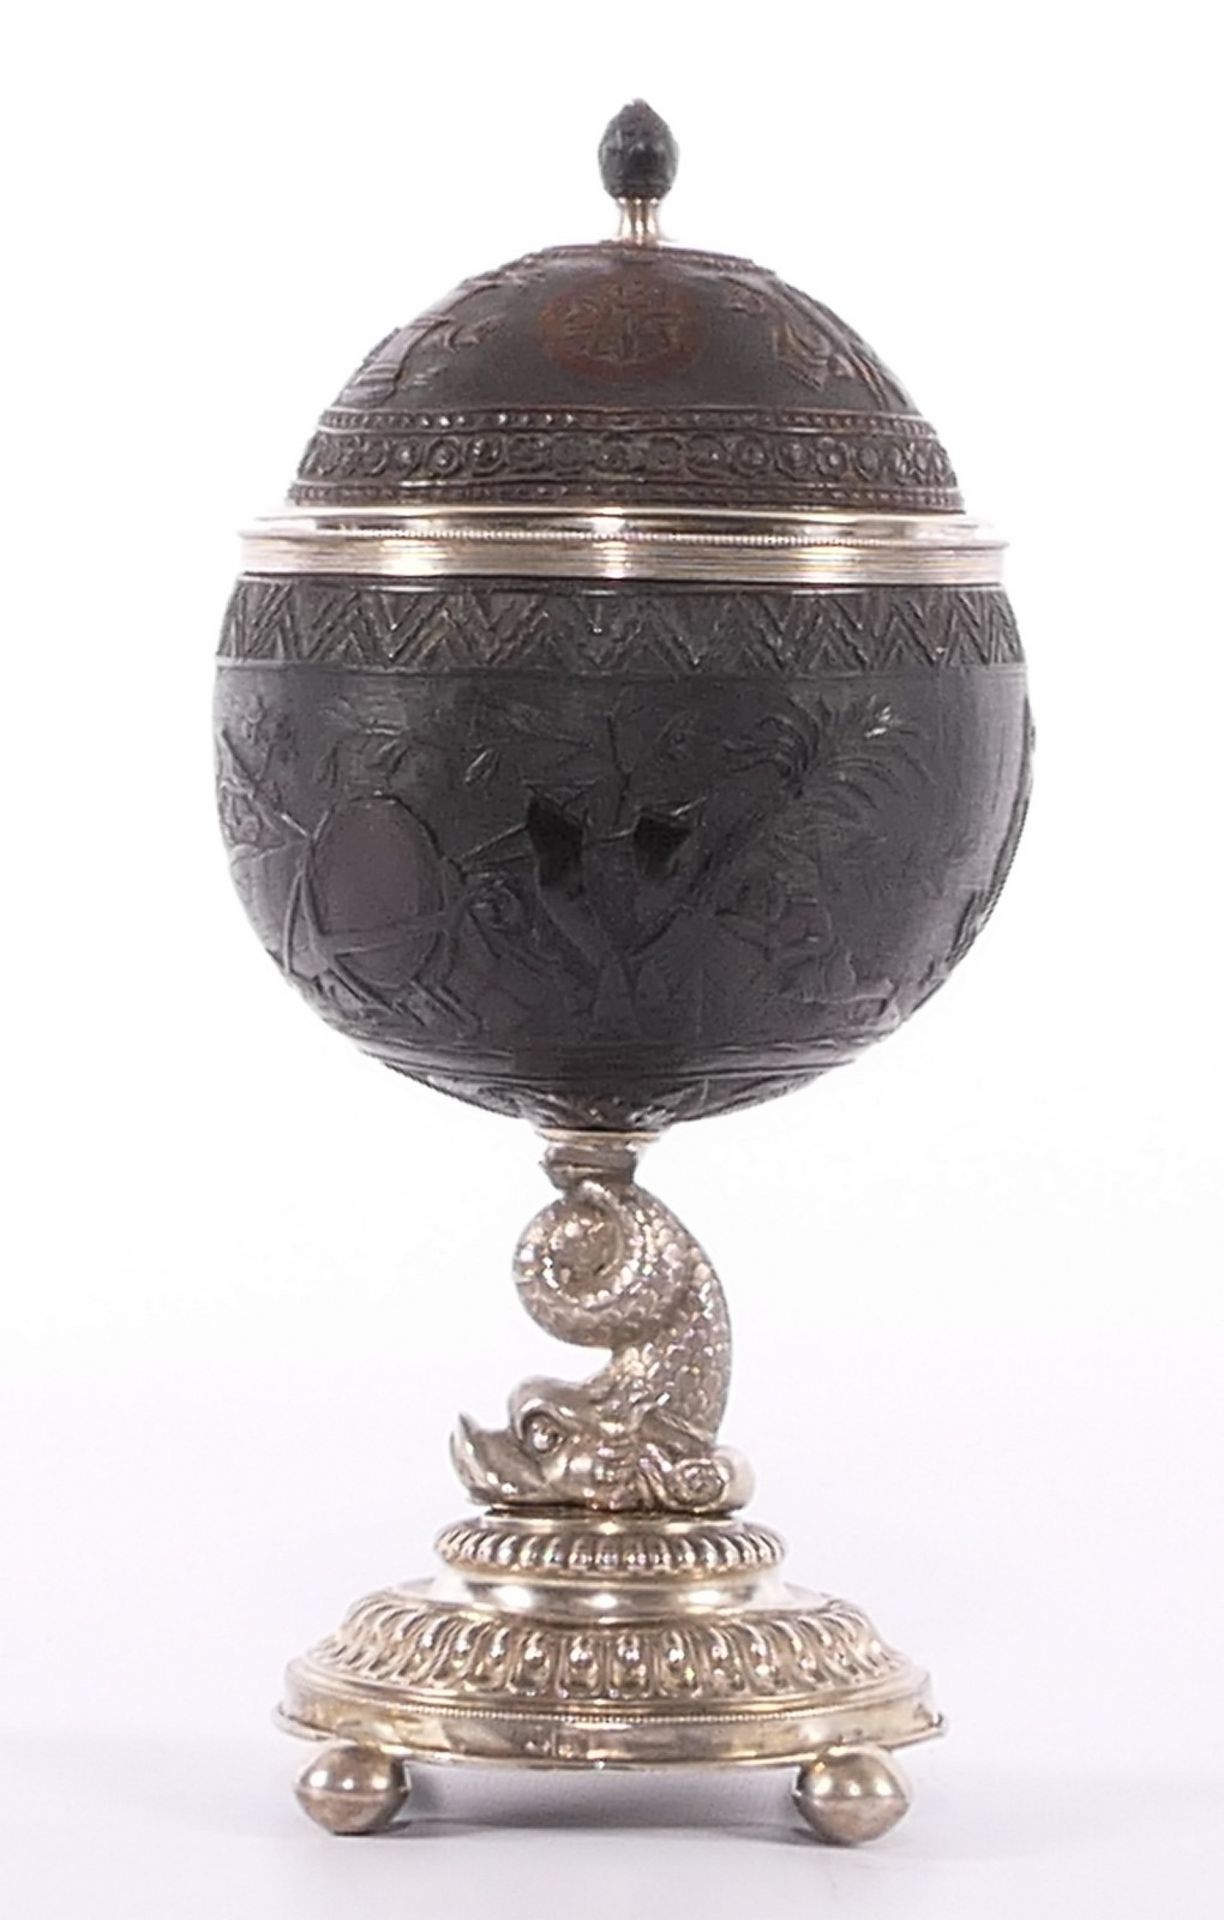 Coconut cup, basso relievo decorated with mythological scenes, owners monogram DM, with a neobaroque - Bild 3 aus 12